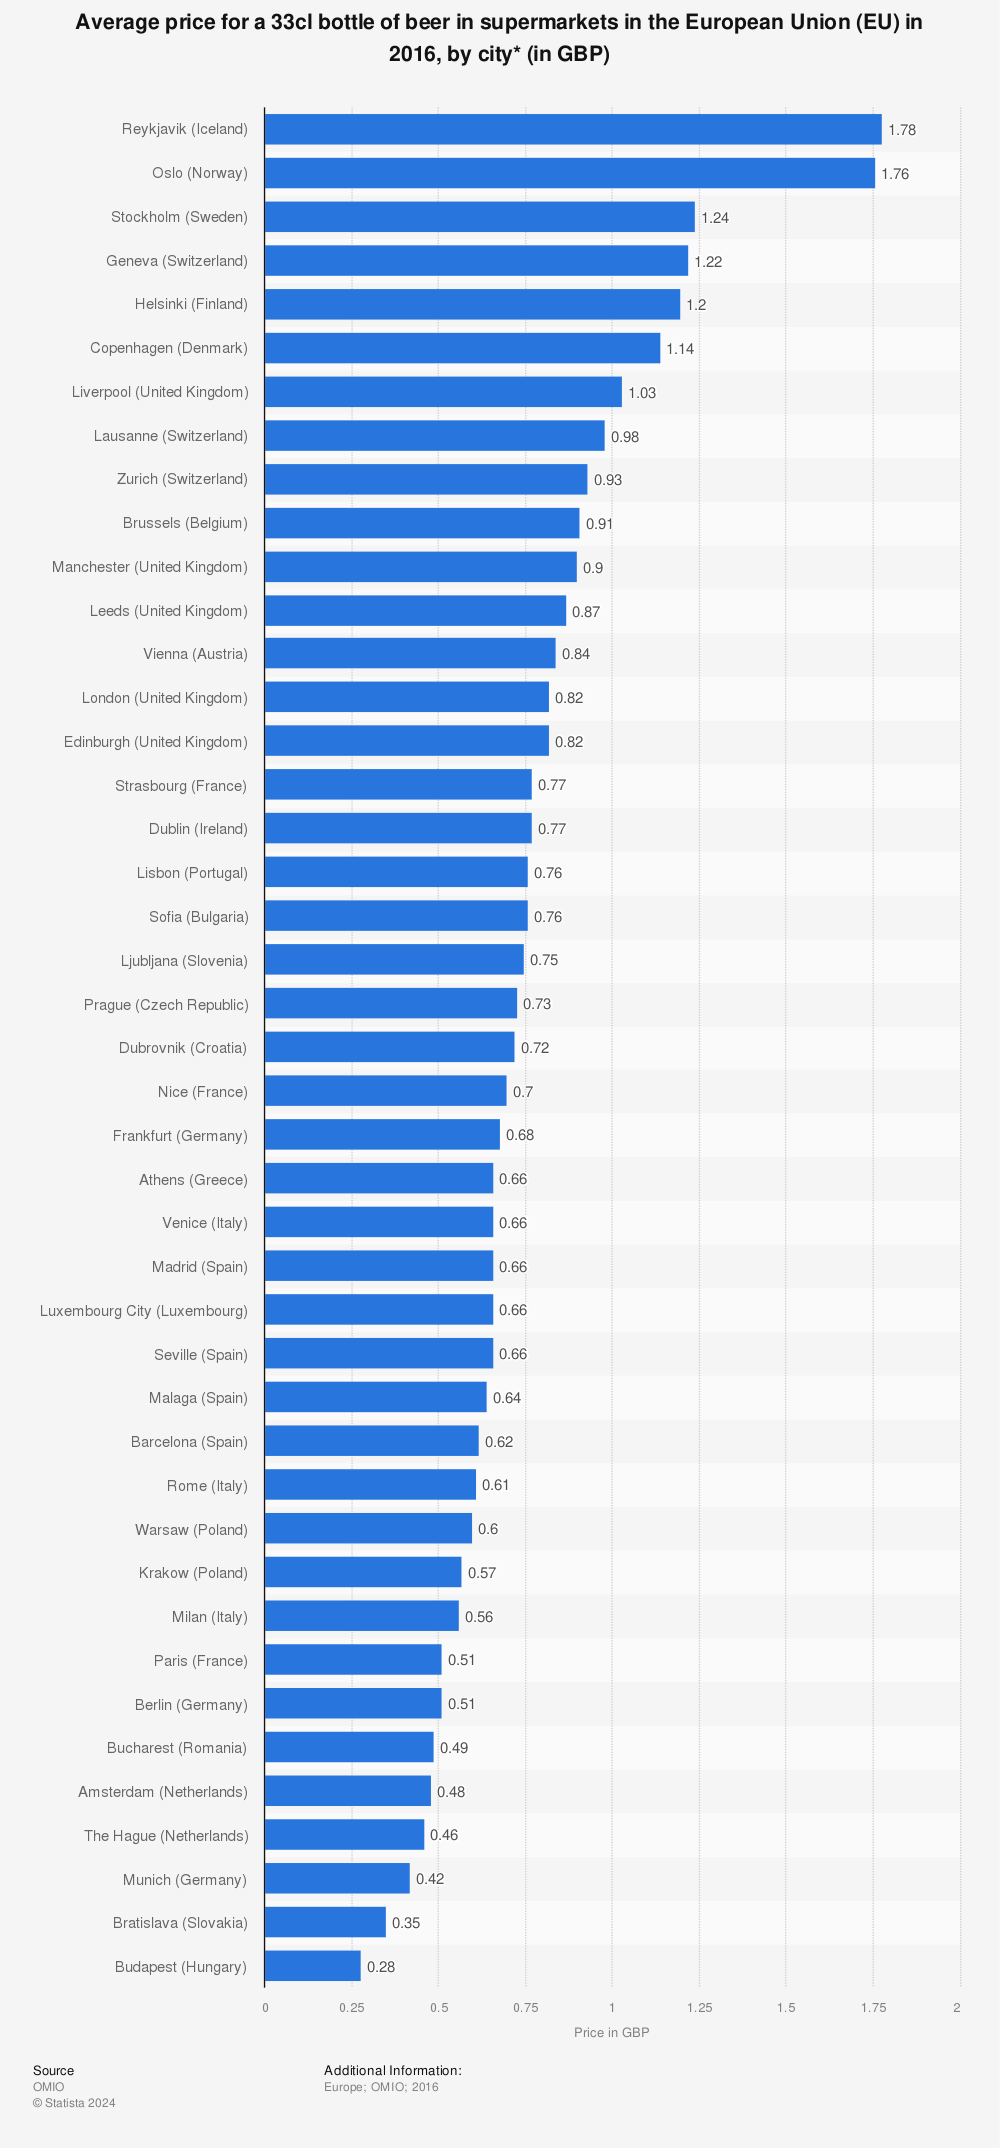 Statistic: Average price for a 33cl bottle of beer in supermarkets in the European Union (EU) in 2016, by city* (in GBP) | Statista